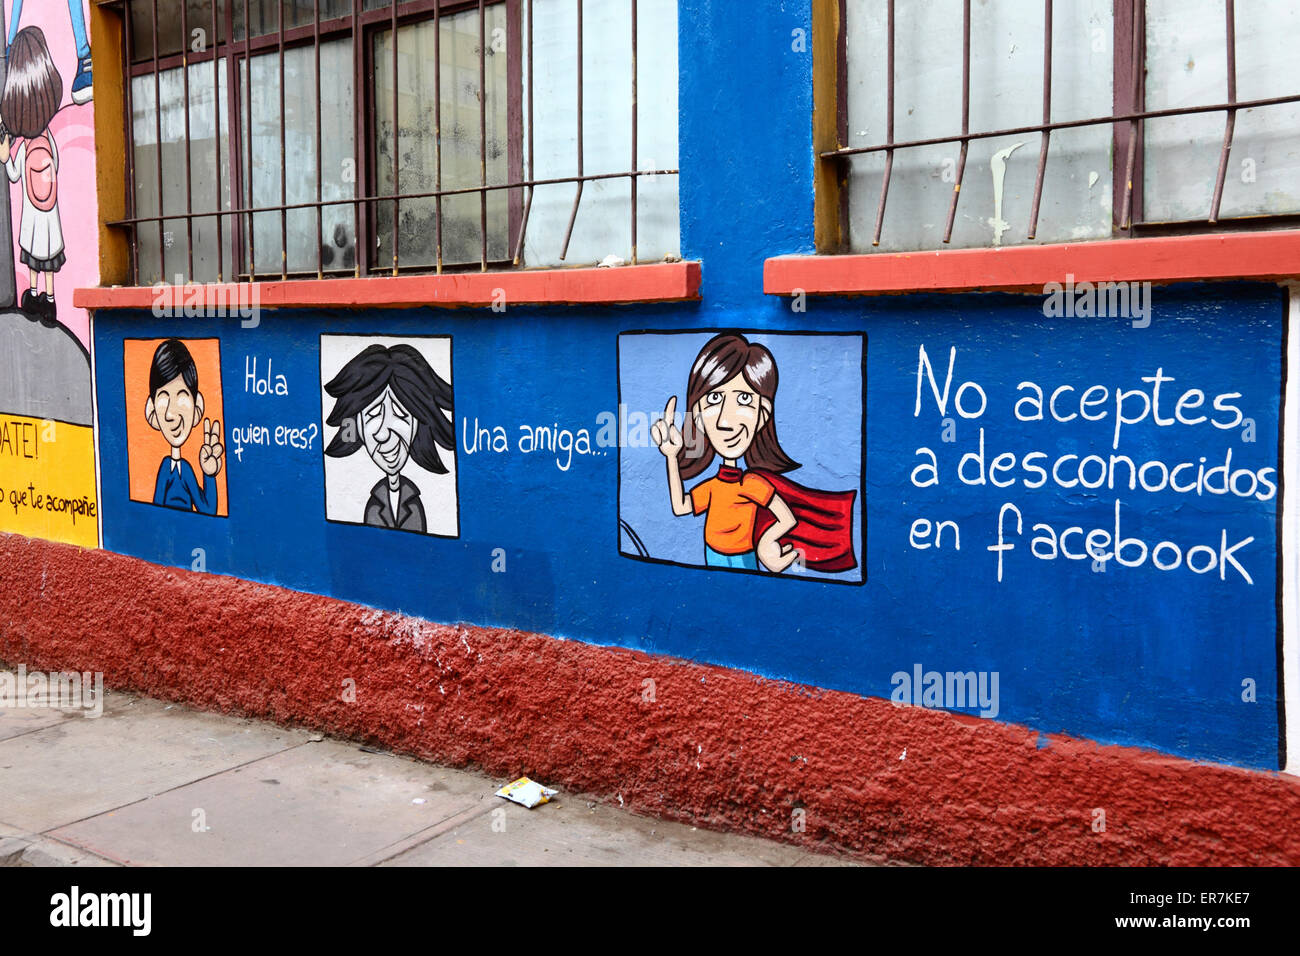 Mural on school warning children not to accept strangers as friends on Facebook, part of a campaign against child trafficking, La Paz, Bolivia Stock Photo